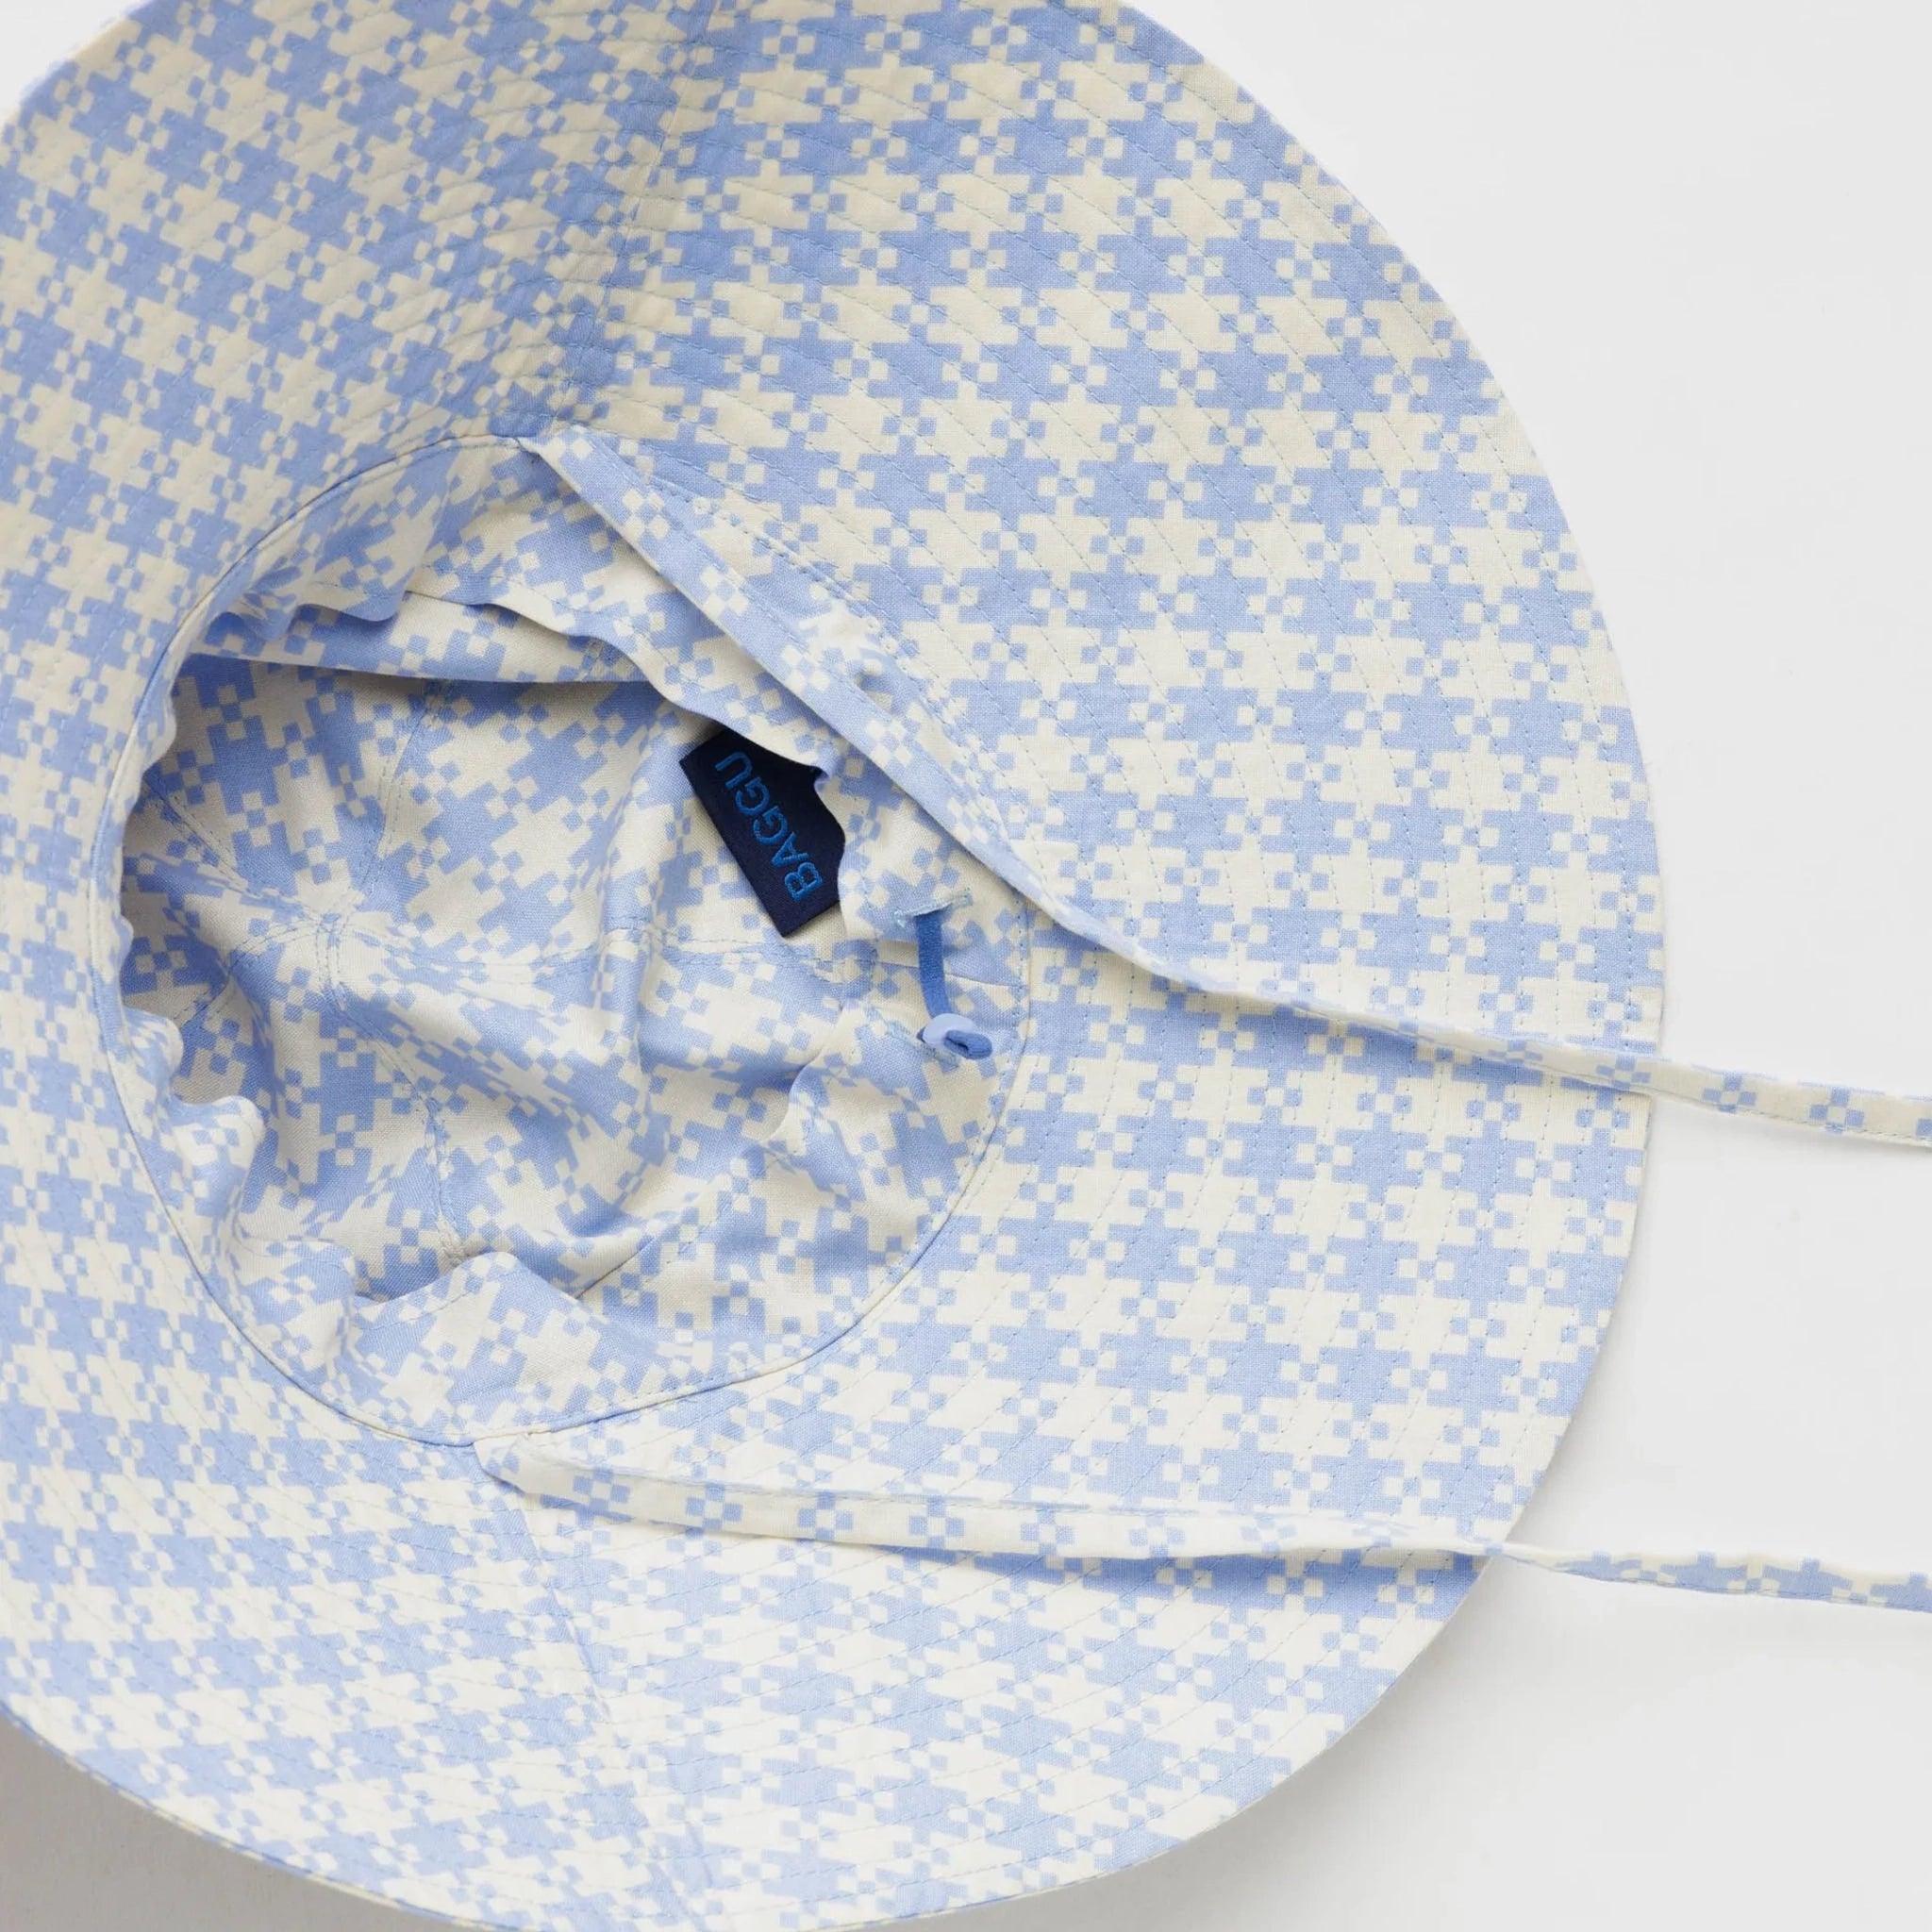 On a white background is a flexible sun hat with straps for securing around the neck with a blue and white gingham print.